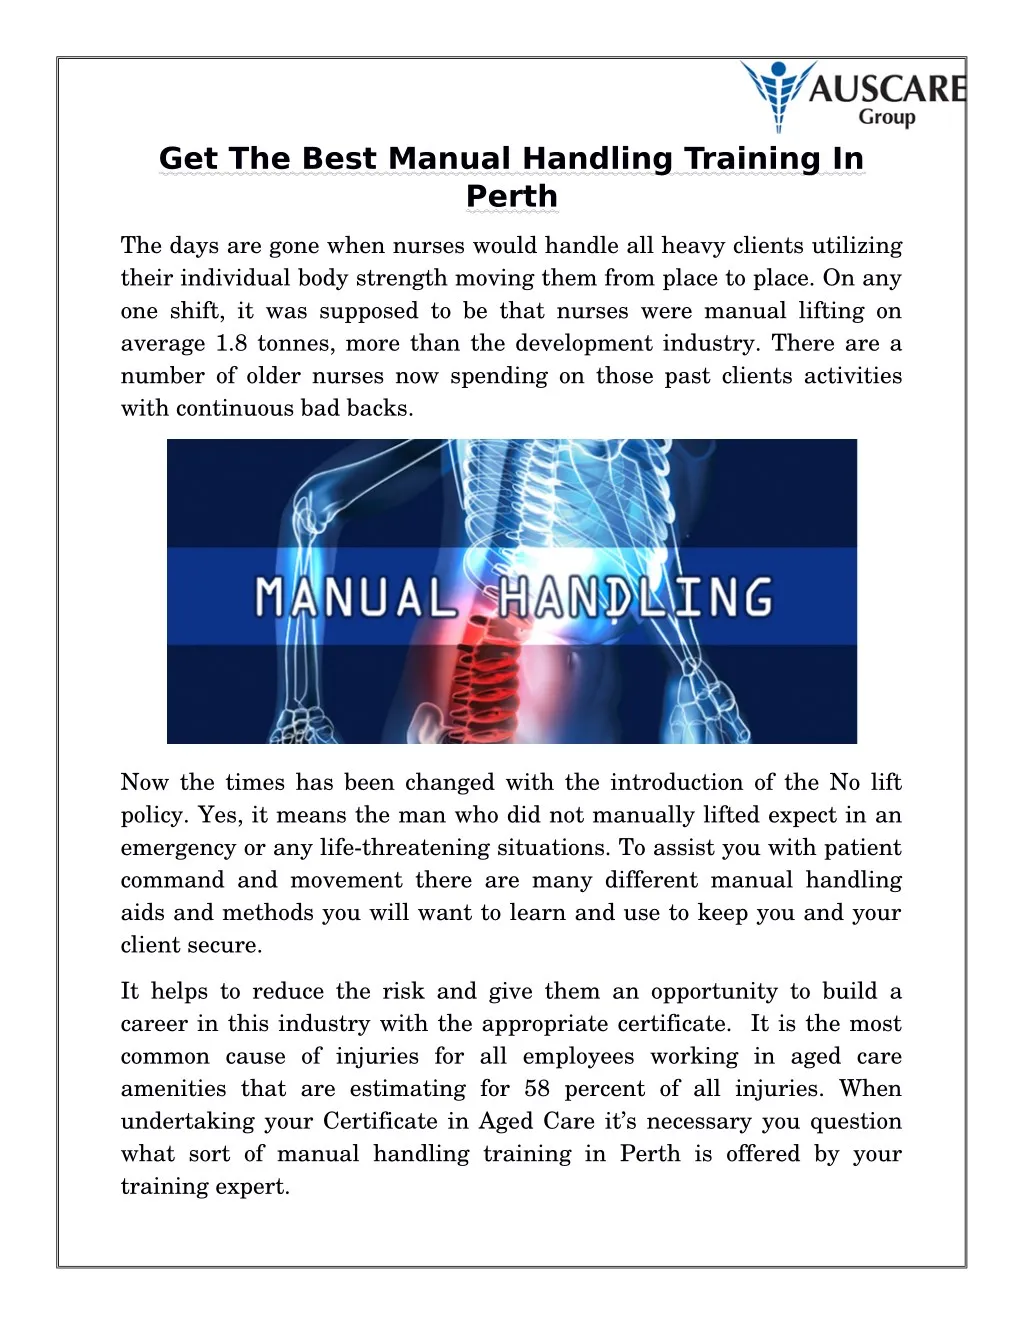 get the best manual handling training in perth